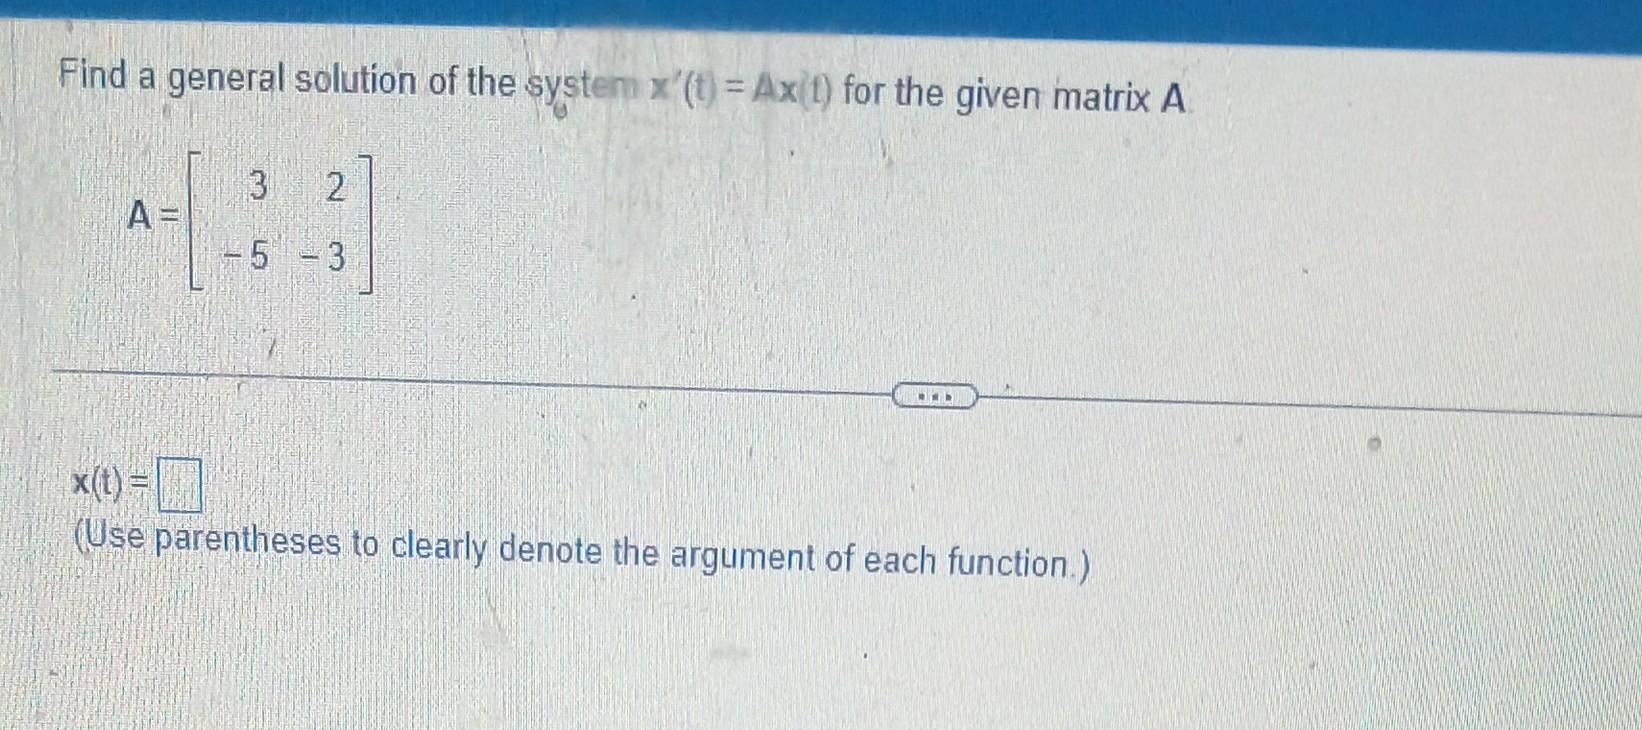 Find a general solution of the systen \( x^{\prime}(t)=A x(t) \) for the given matrix \( A \)
\[
A=\left[\begin{array}{rr}
3